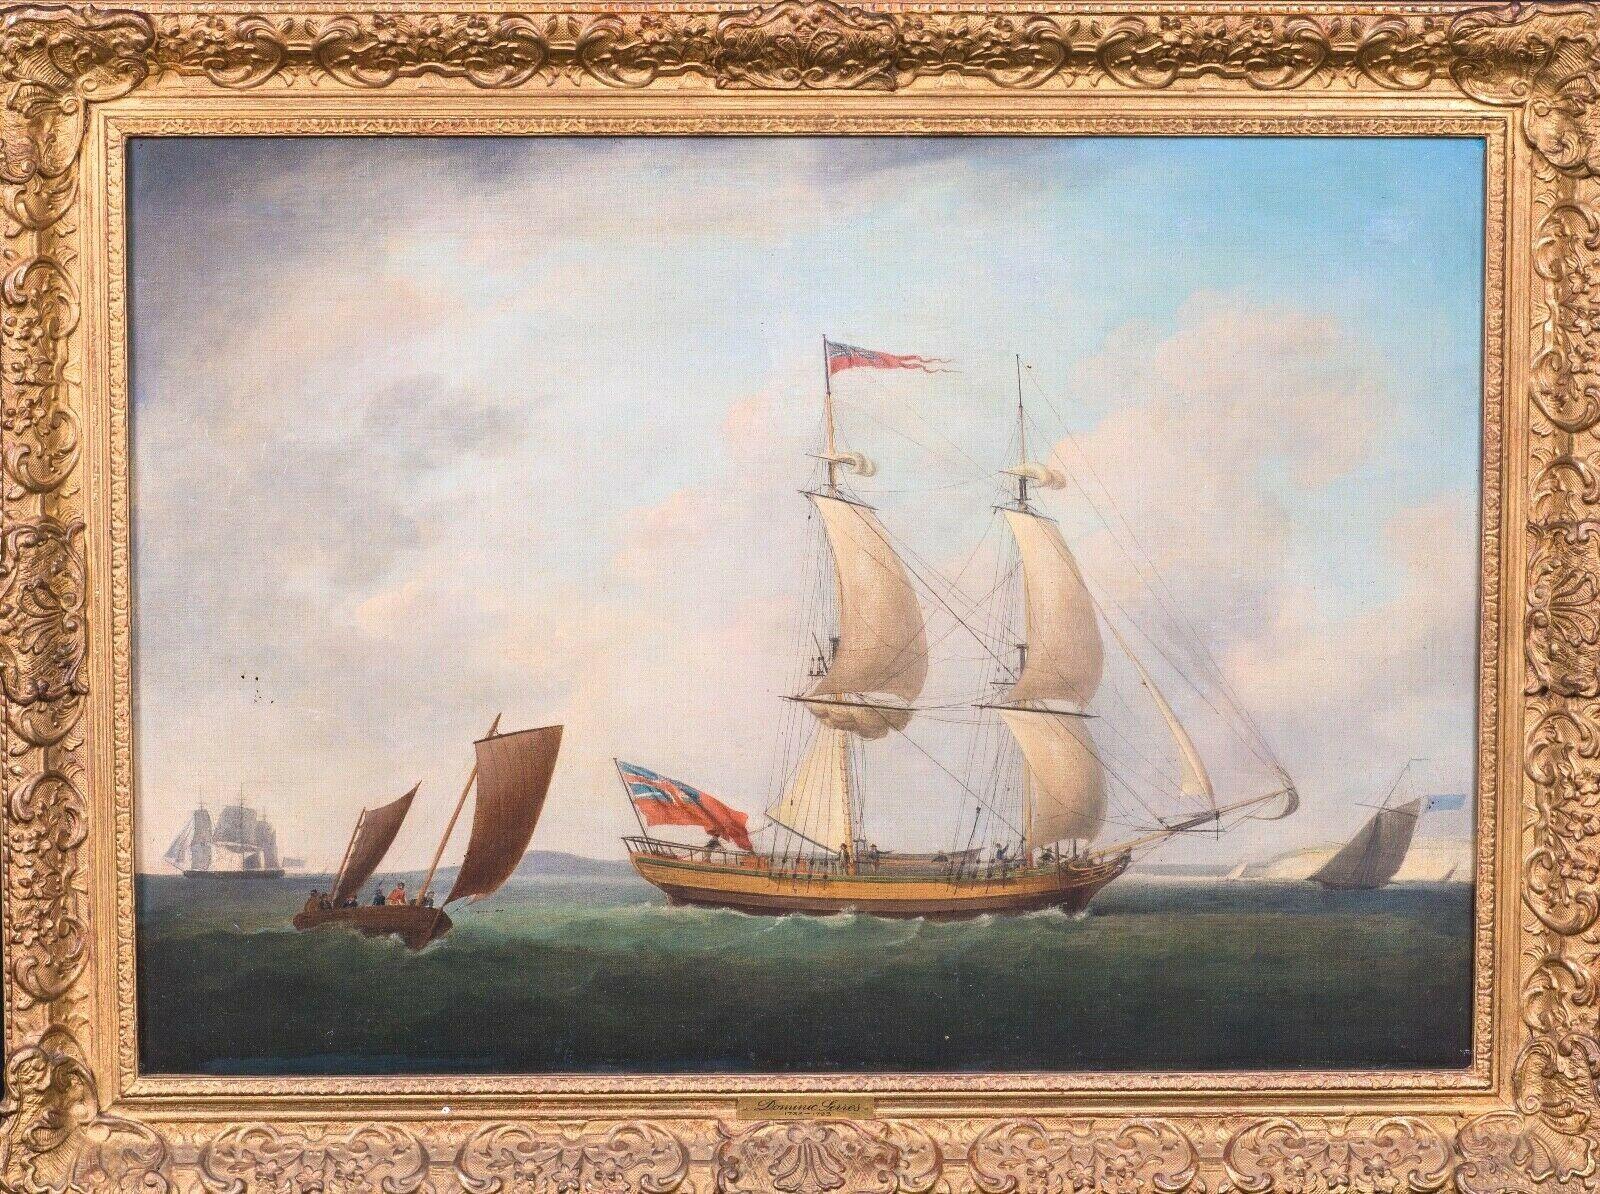 Dominic Serres Landscape Painting - Ships Sailing Off The Coast, 18th Century